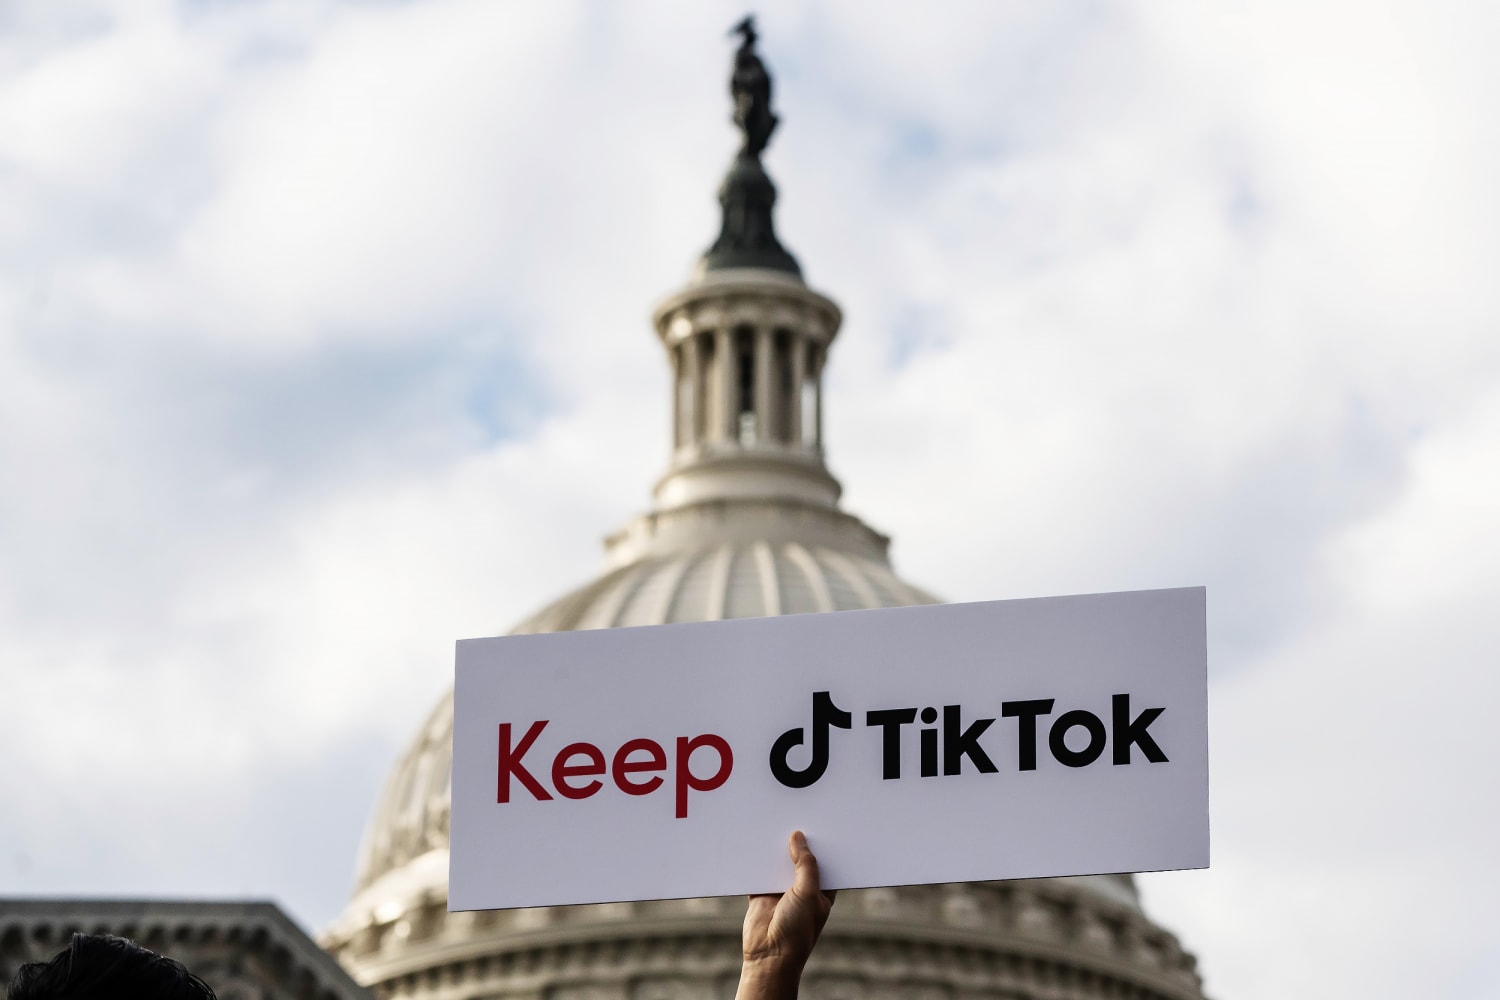 Poll: Gen Z voters oppose TikTok ban, but worry about China’s influence